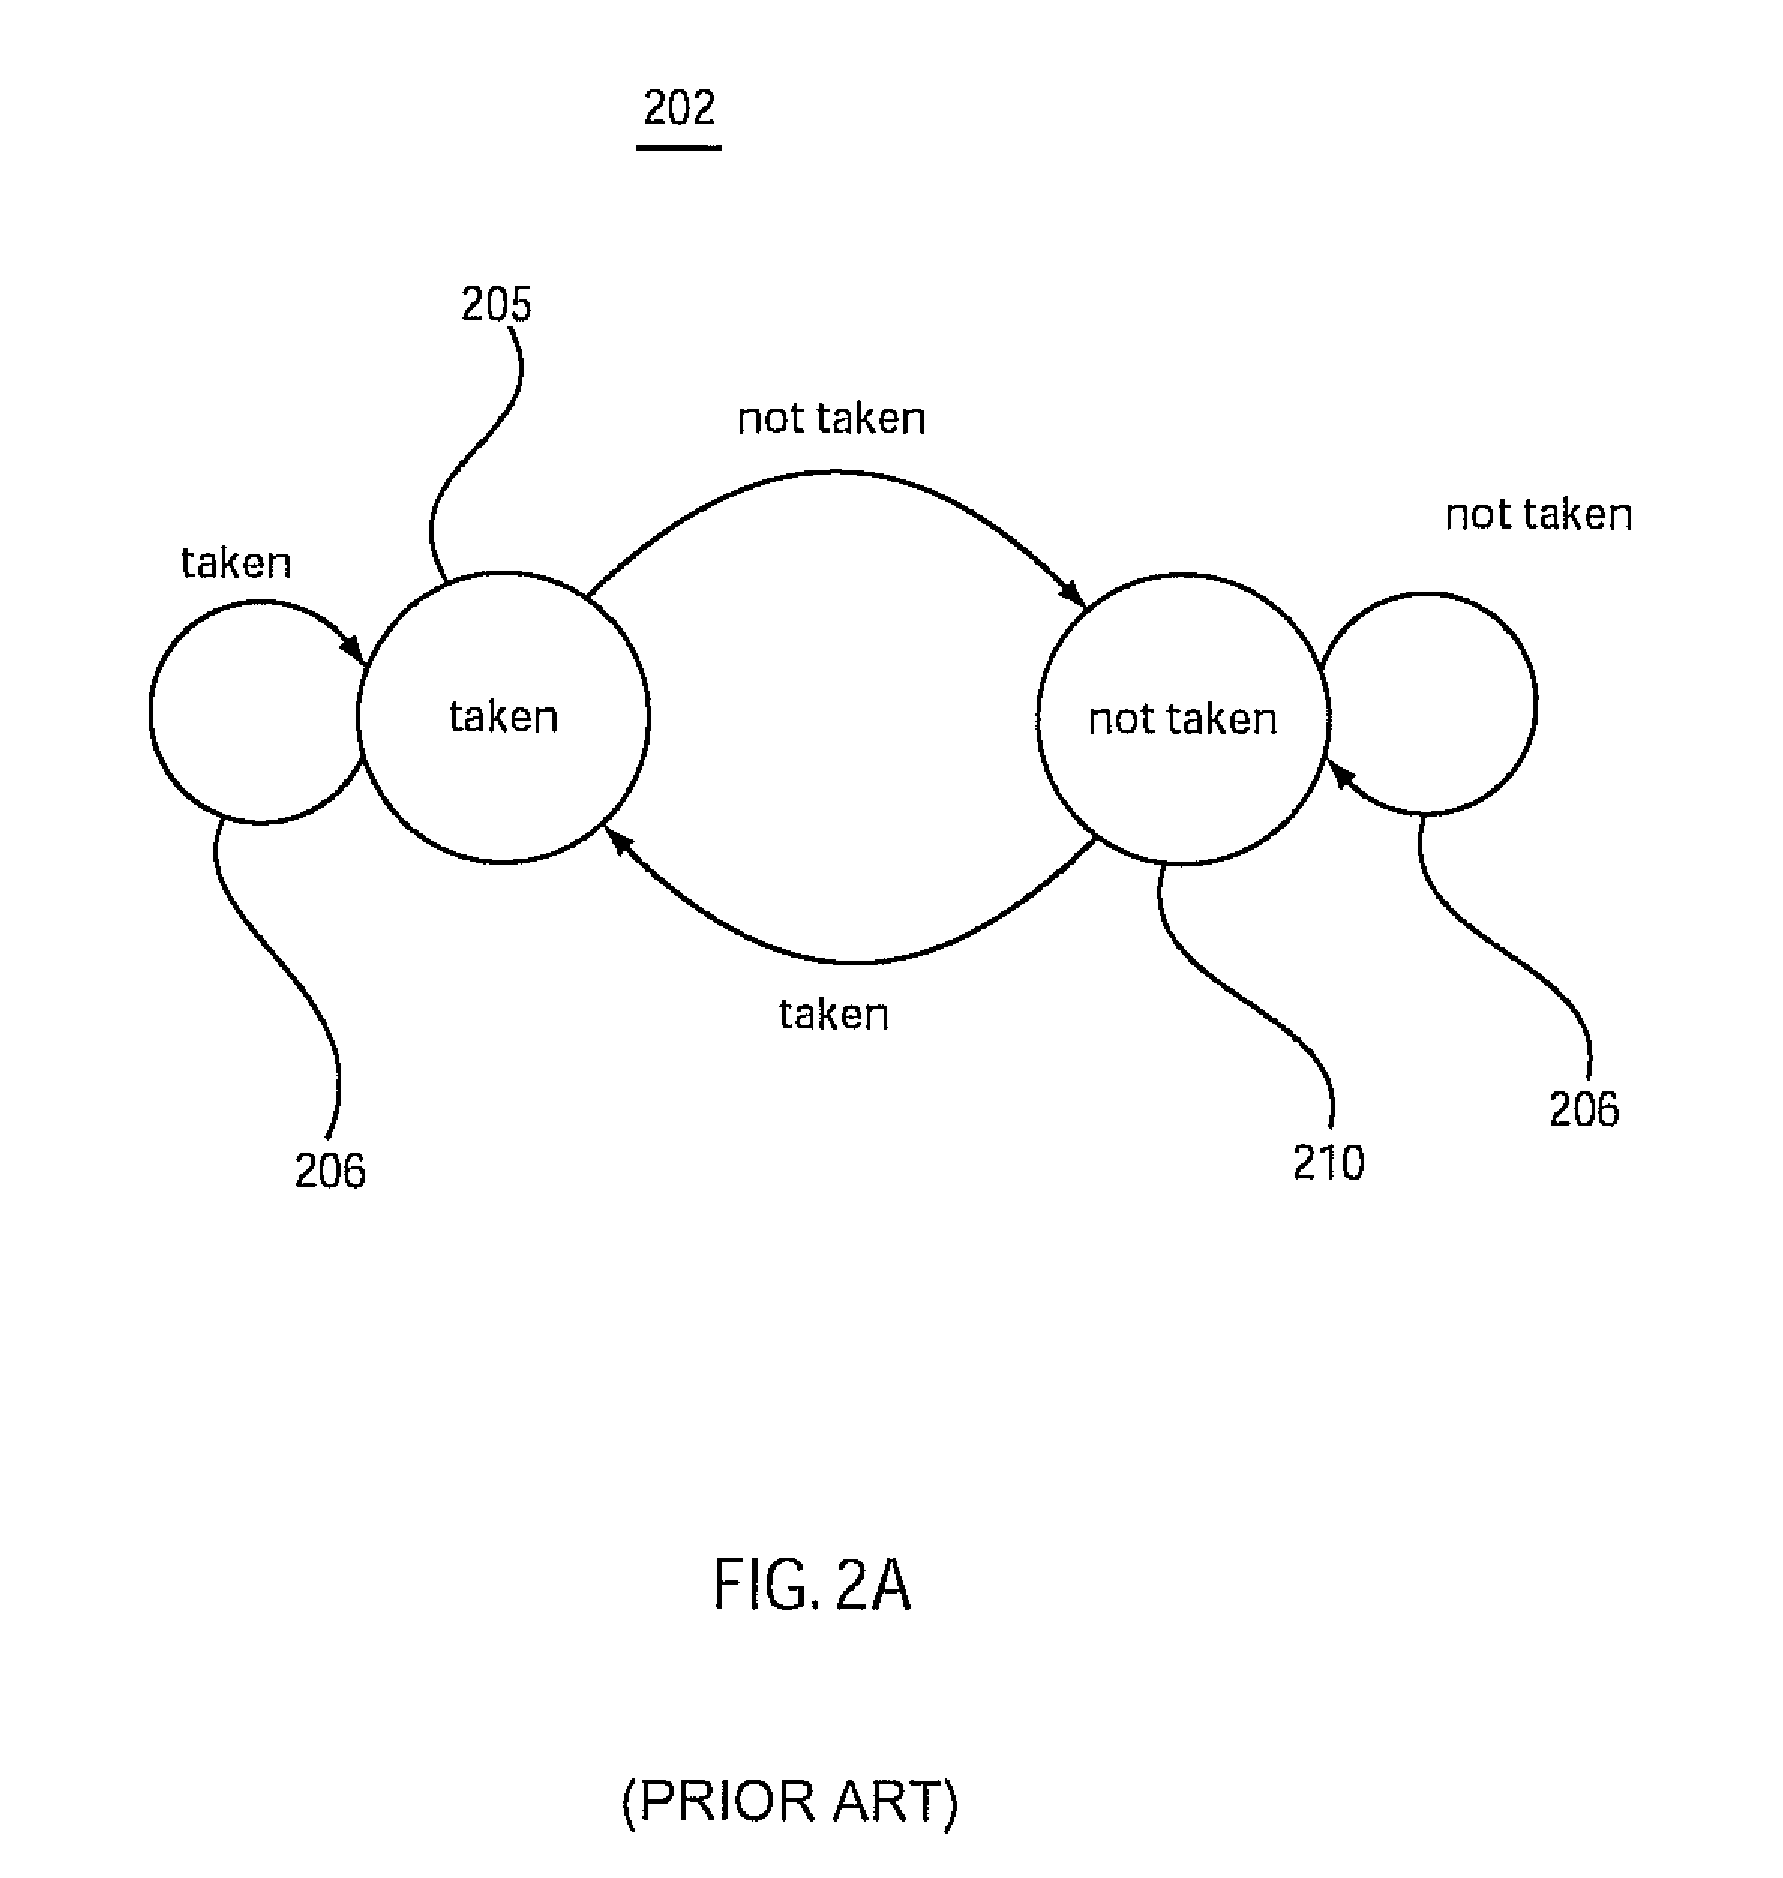 Polymorphic branch predictor and method with selectable mode of prediction